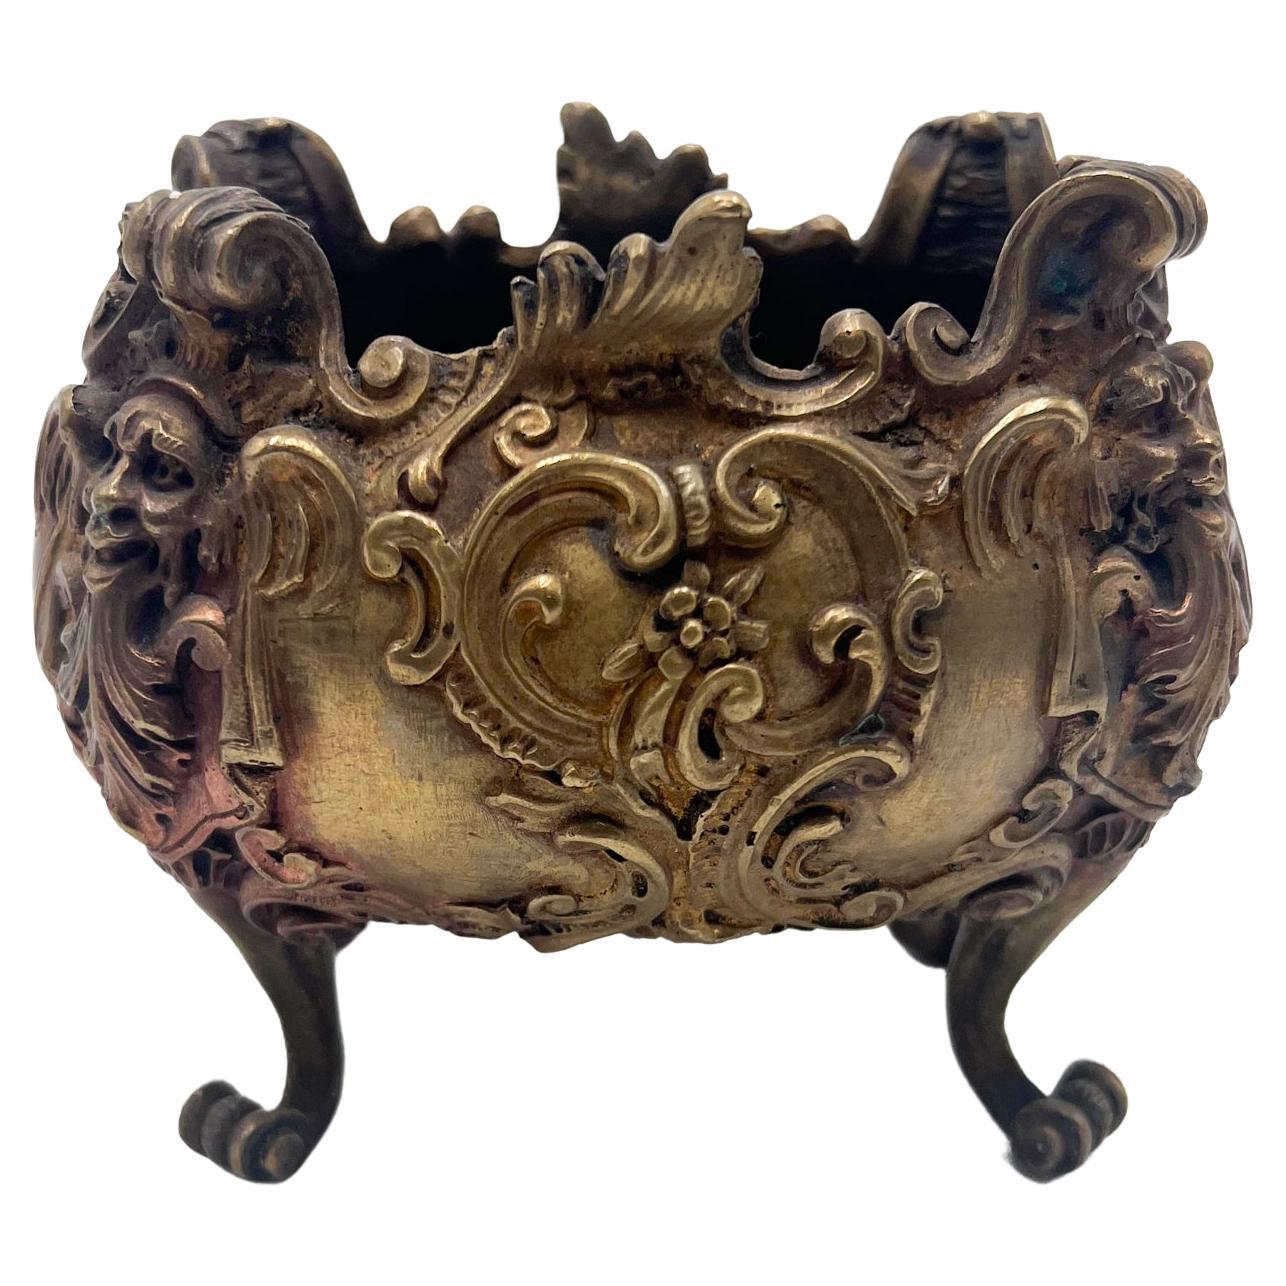 Bronze Bowl by Antonio Pandiani from the 1800s